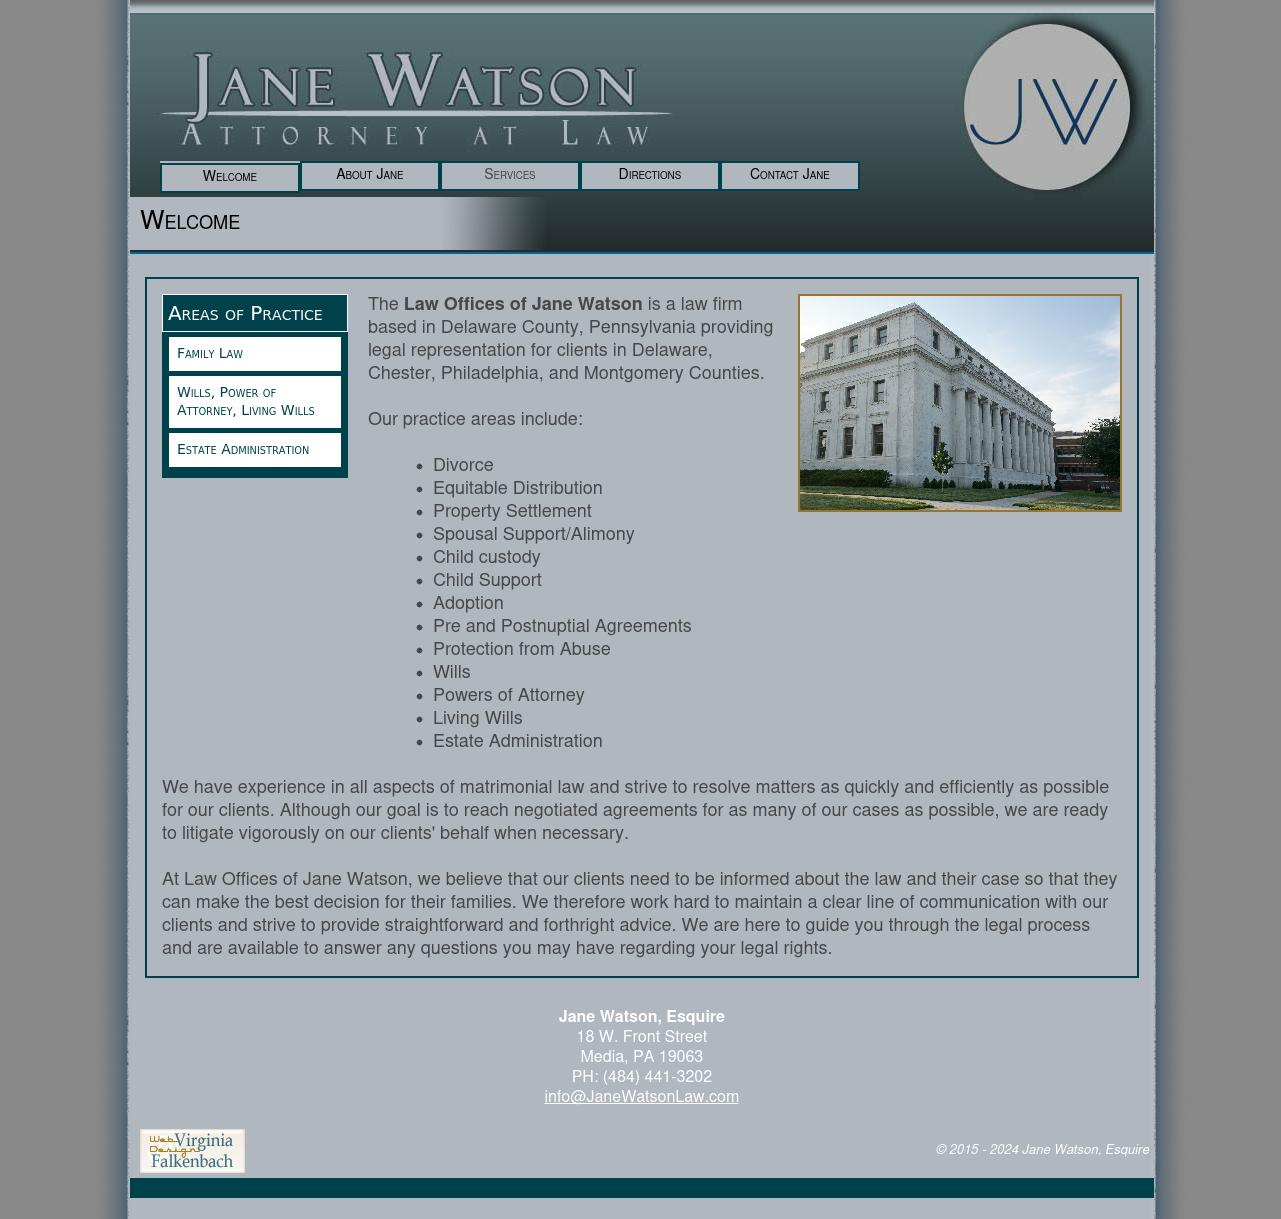 Law Offices of Jane Watson - Media PA Lawyers